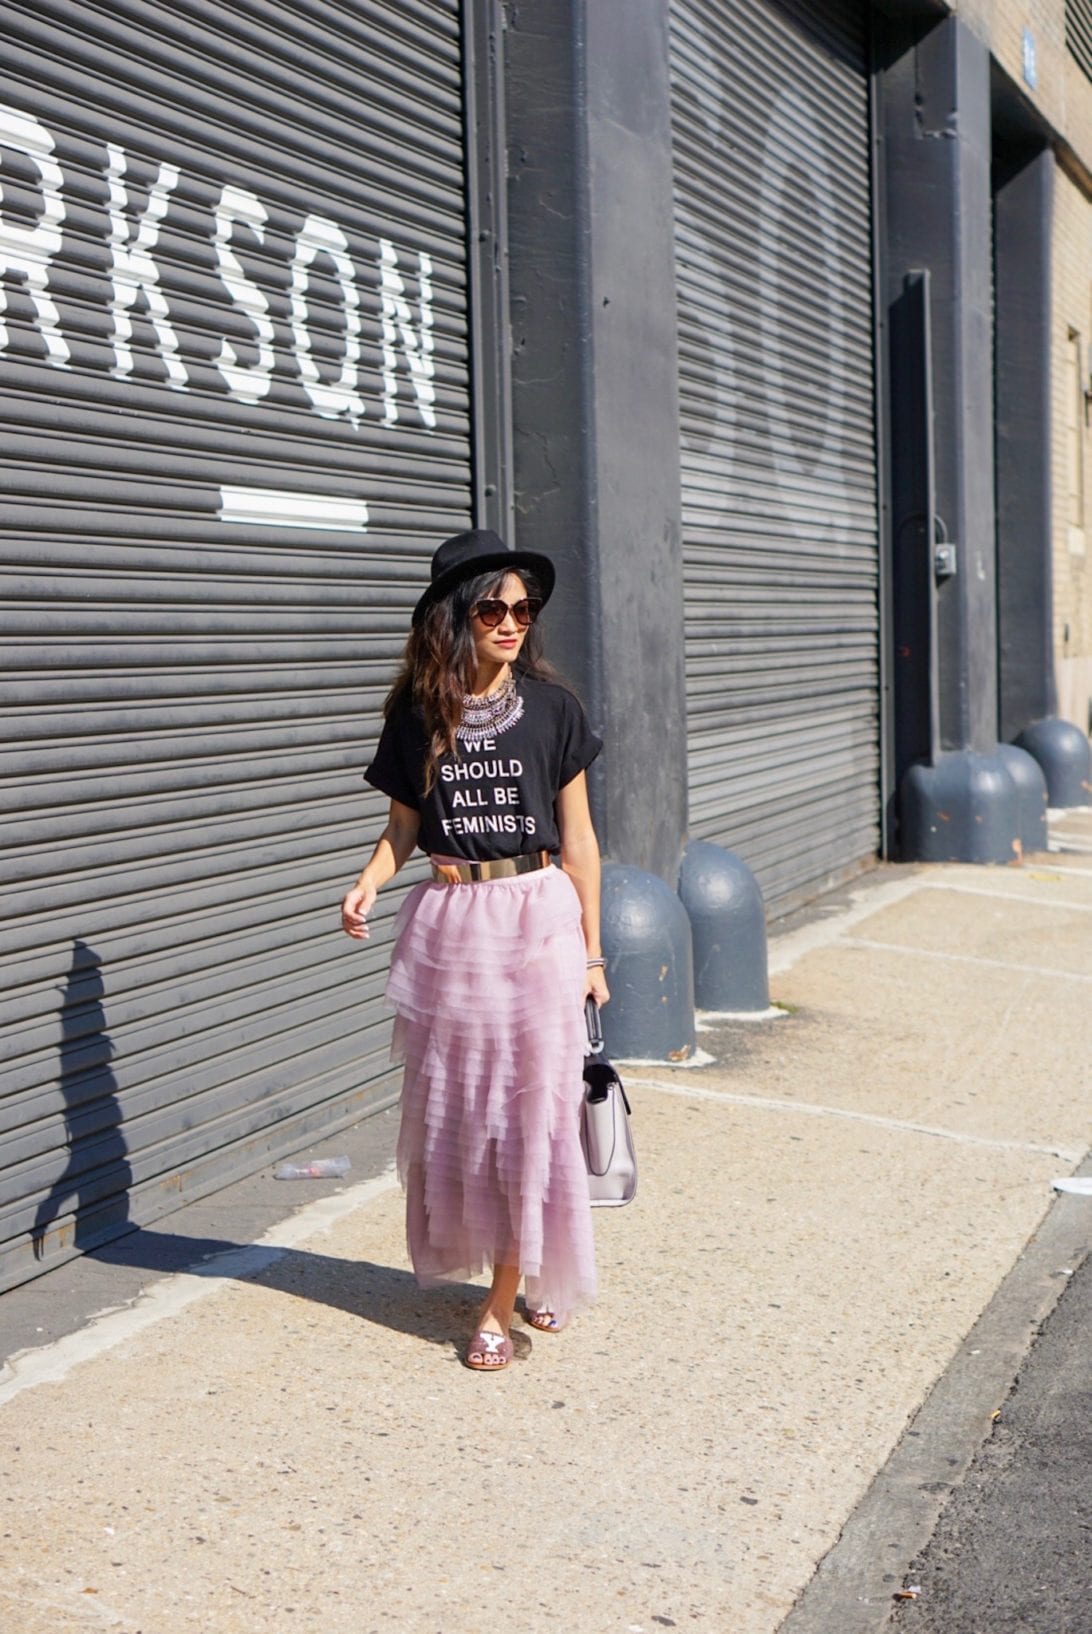 NYC STREET STYLE, New York FASHION WEEK, New York CITY, NYFW 2017, NYFW STREET STYLE, STREET STYLE, FEMINIST, TULLE SKIRT, SEX AND THE CITY OUTFIT, NY GLITTER FLATS, ZAC ZAC POSEN BAG, BLACK FEDORA